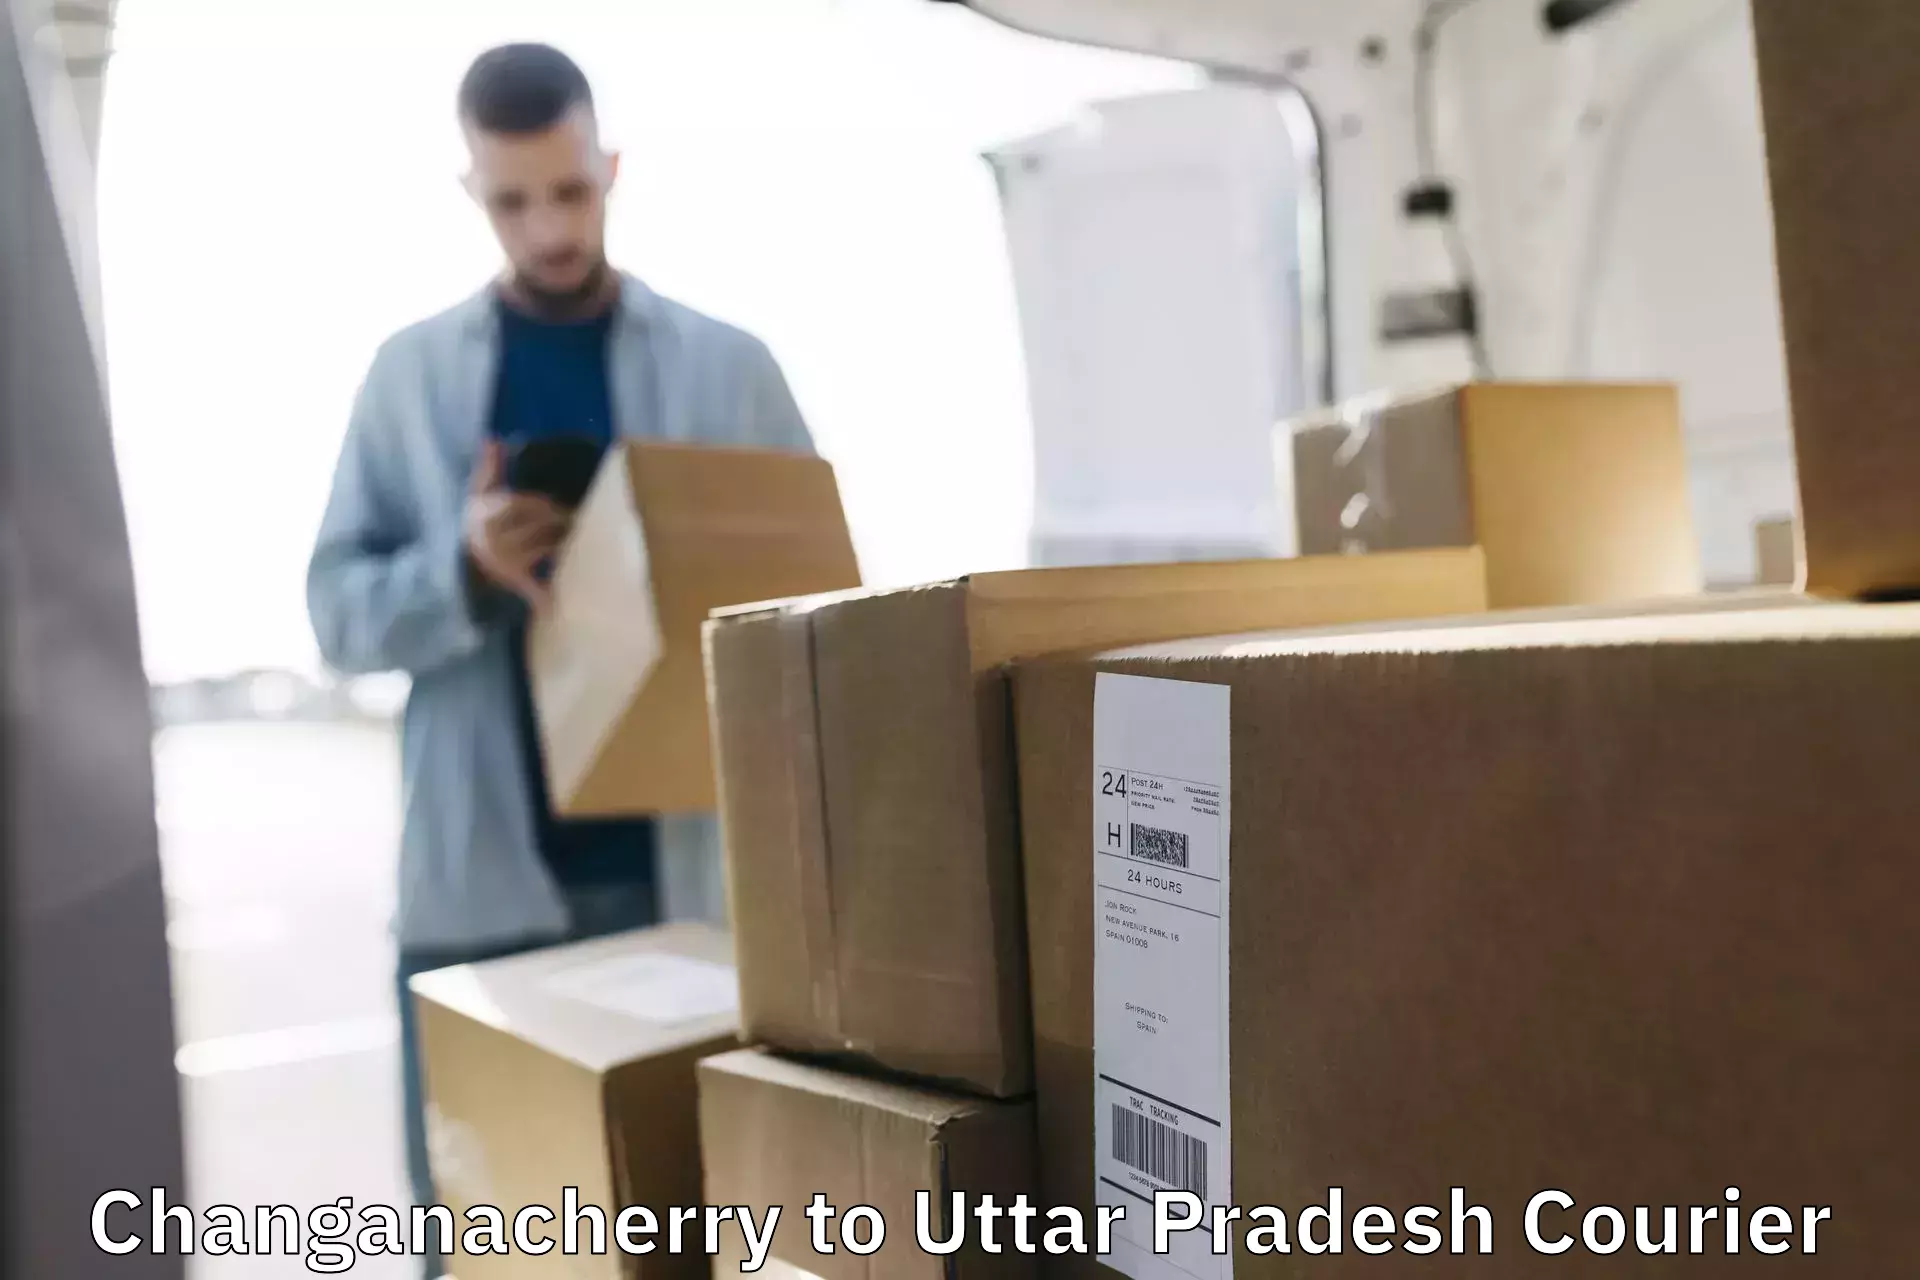 Global courier networks Changanacherry to Amethi